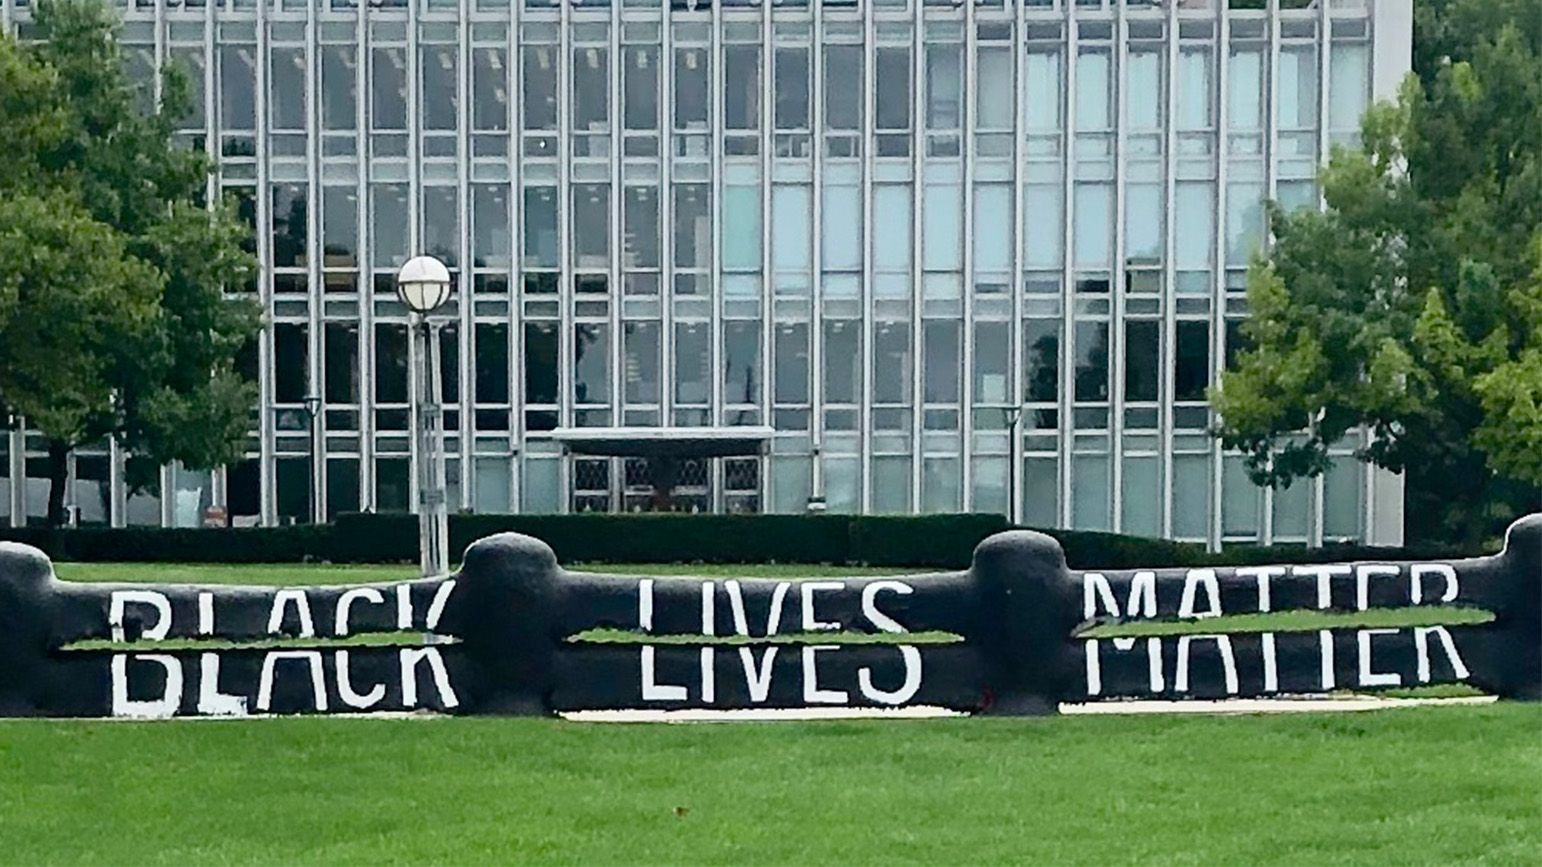 Photograph of The Fence at CMU with the text Black Lives Matter painted on it